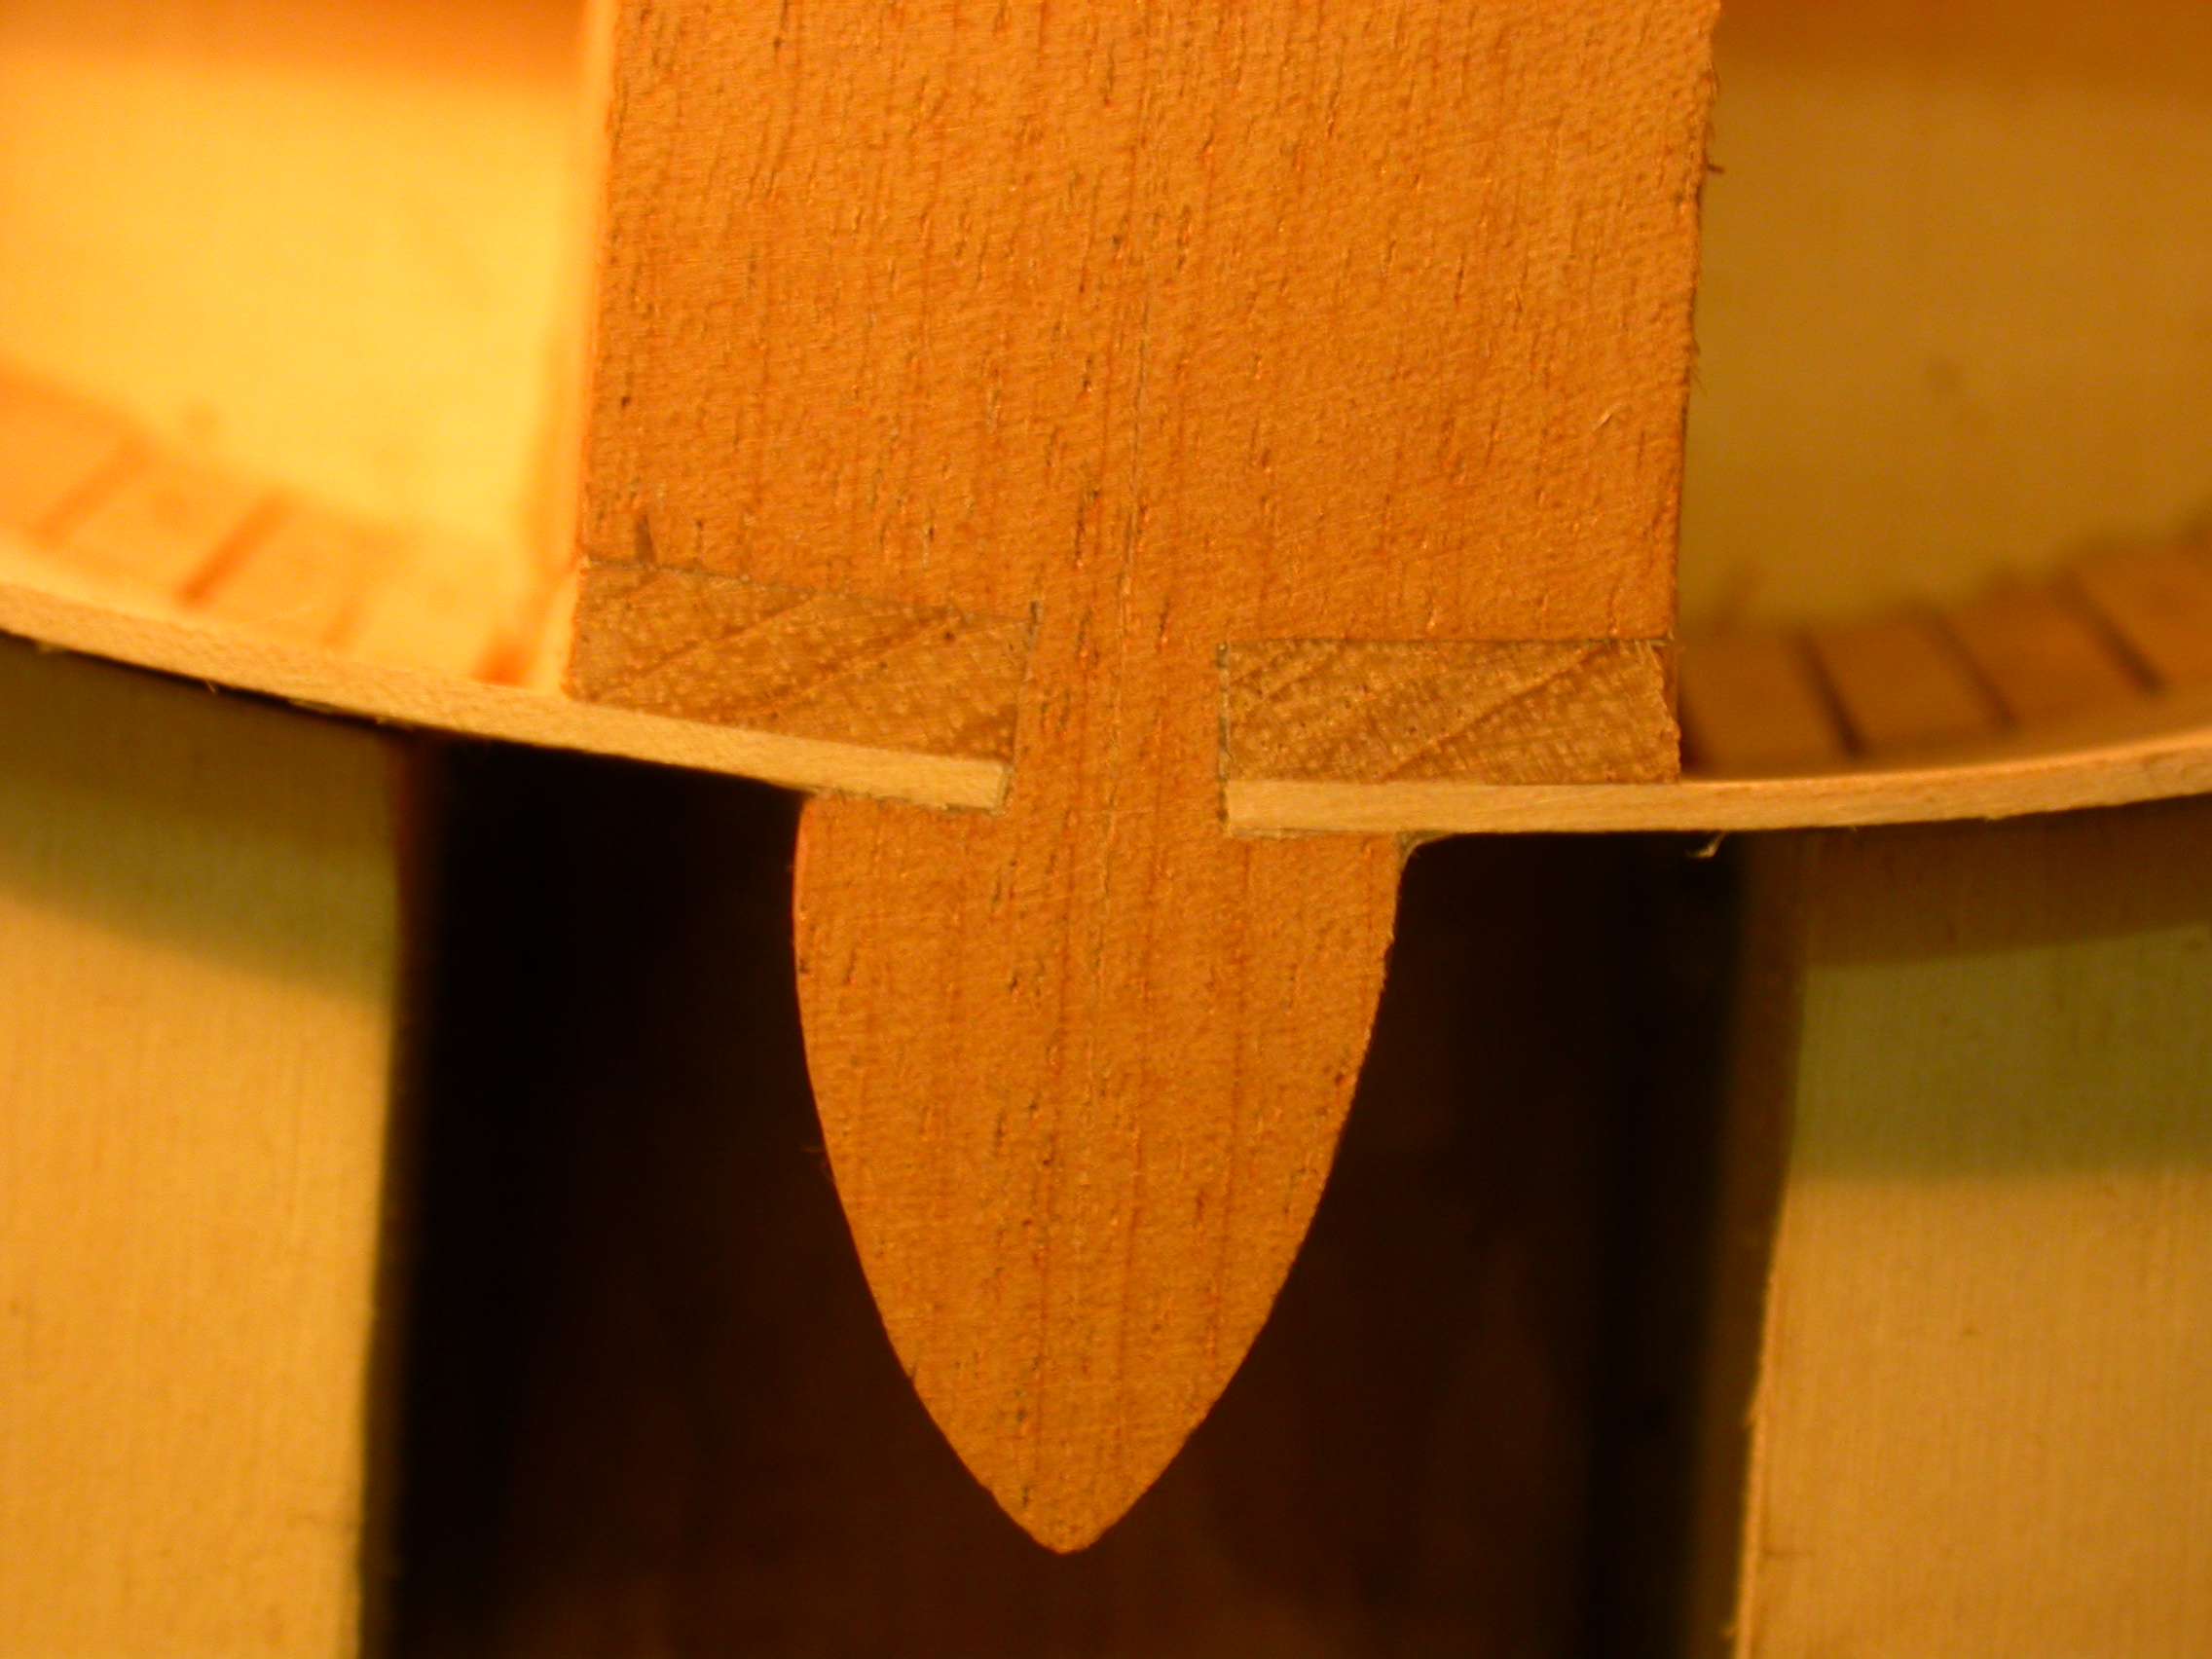 paul instrument violin craft in the making making school wood angle